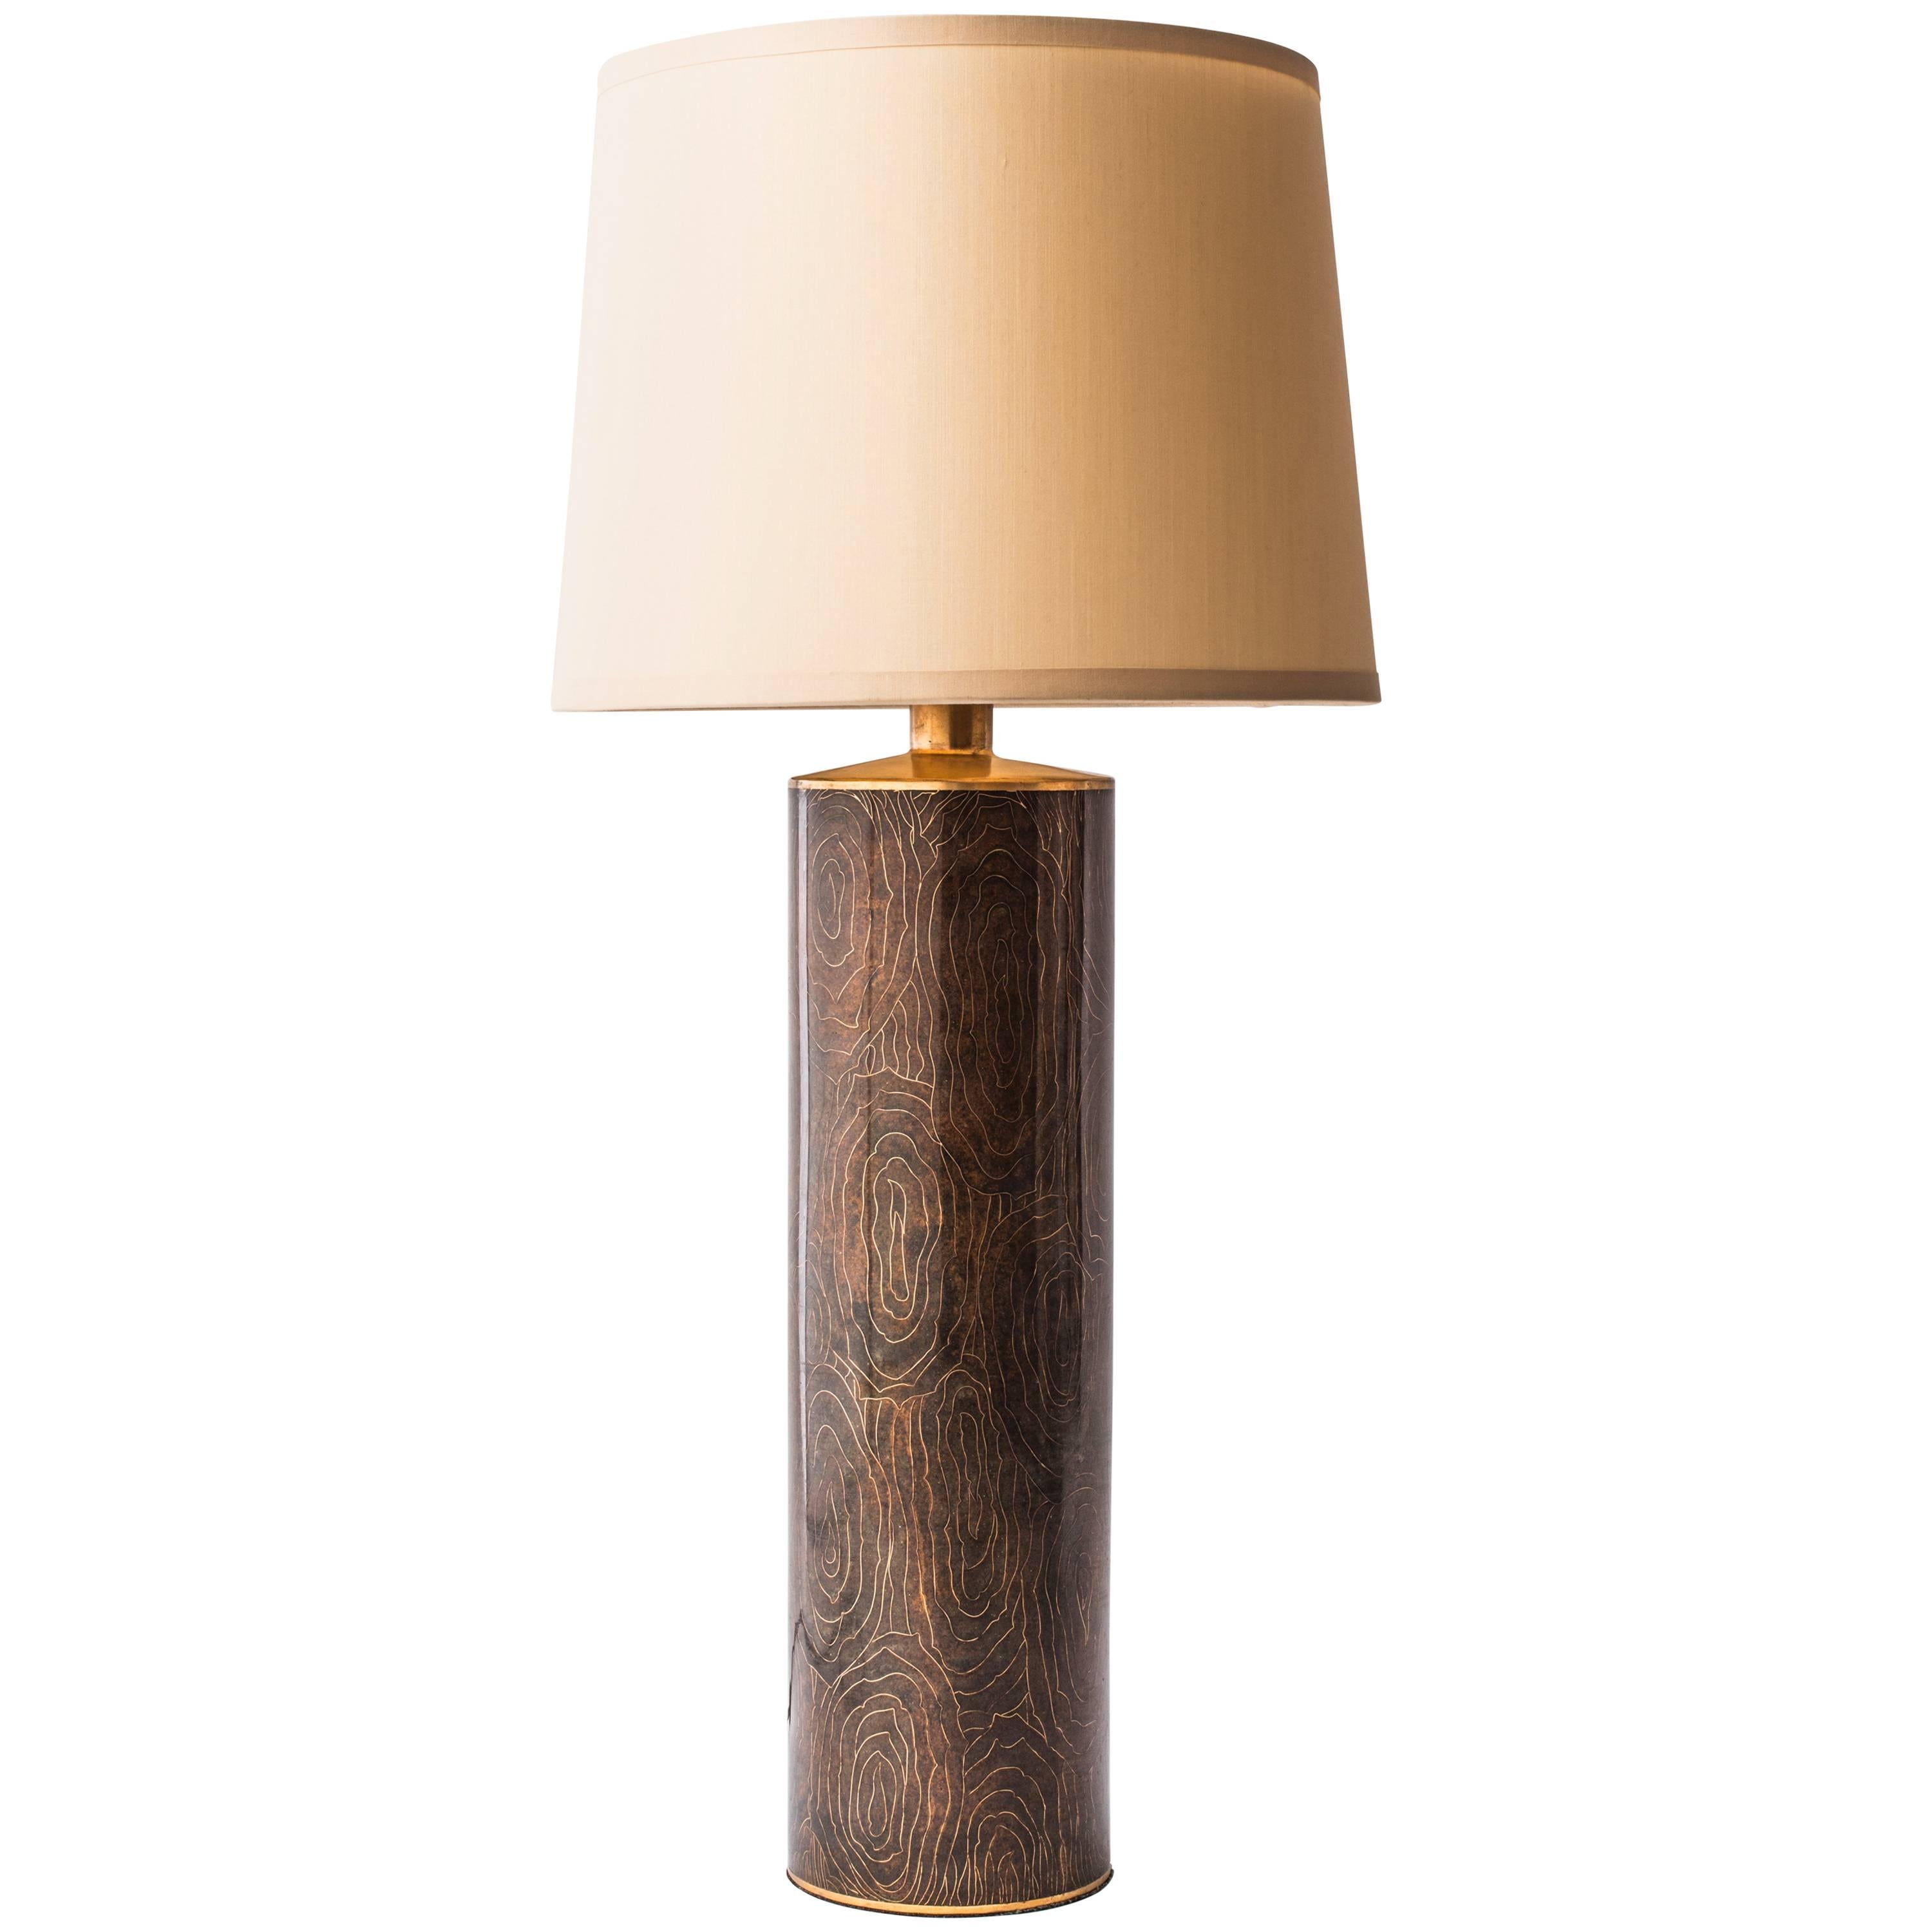 Robert Kuo for McGuire Buche Amber Wood Grain Table Lamp, Cloisonne For Sale